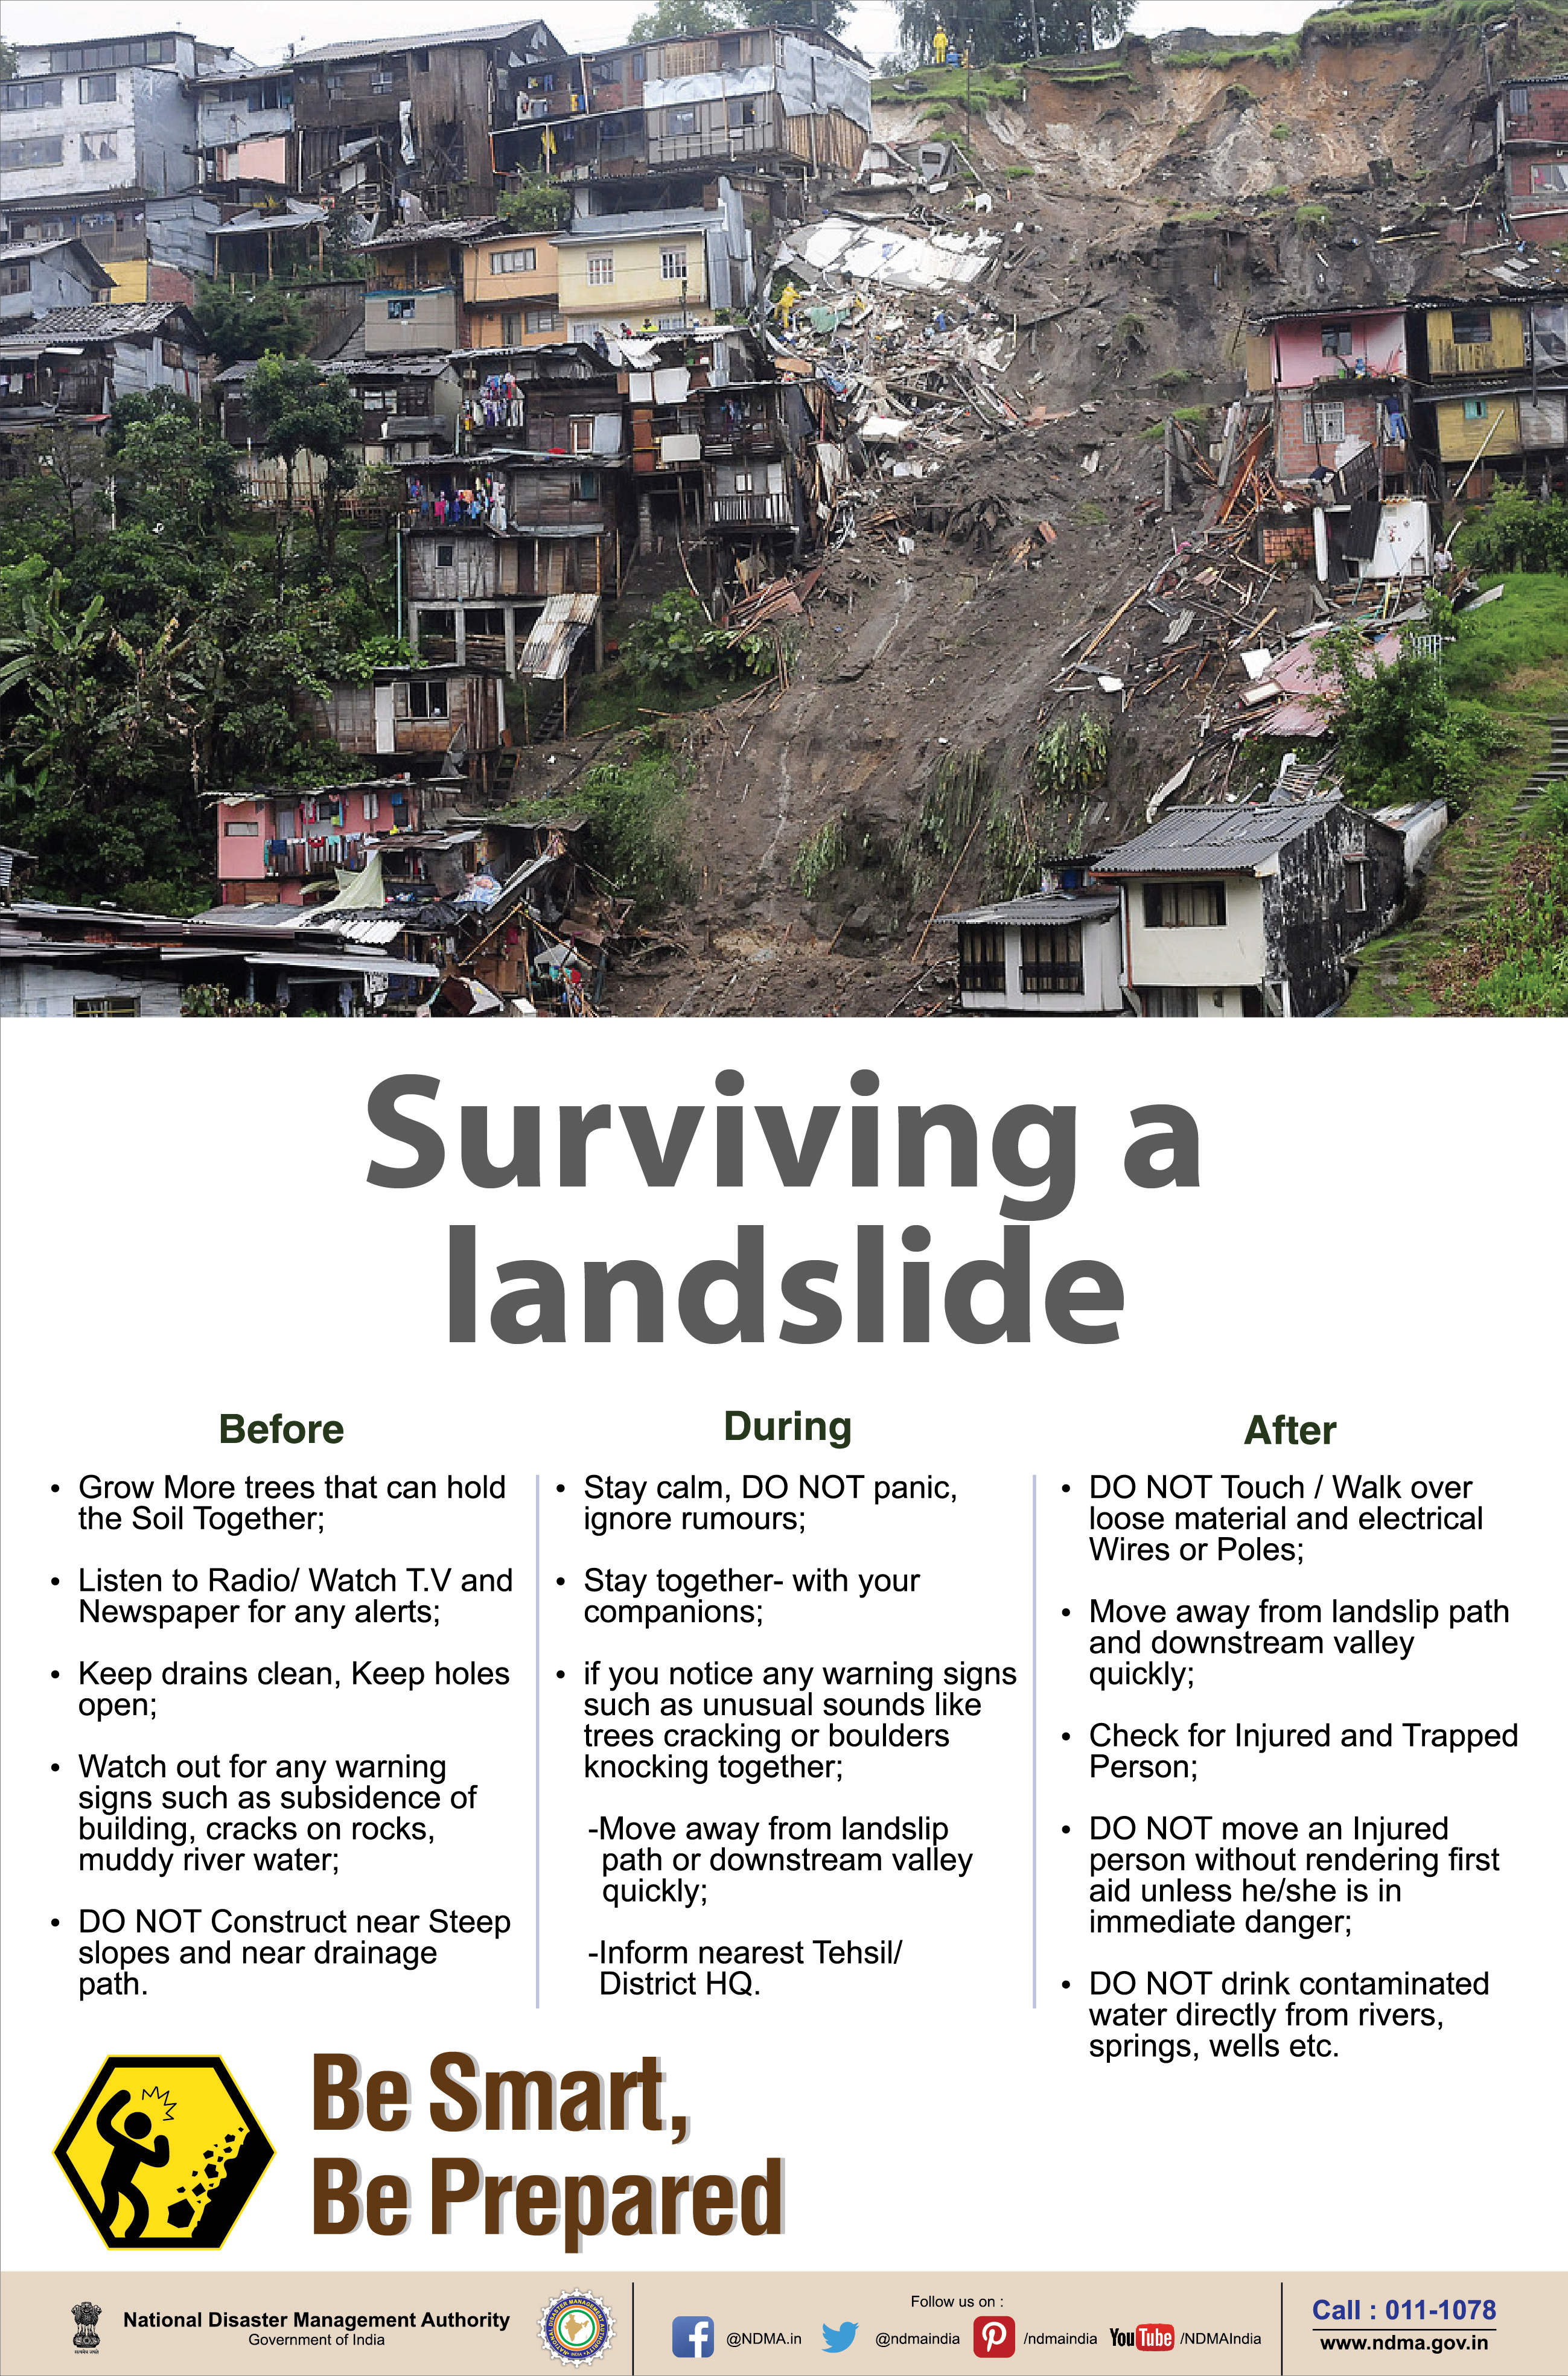 What to do before, during and after a landslide?